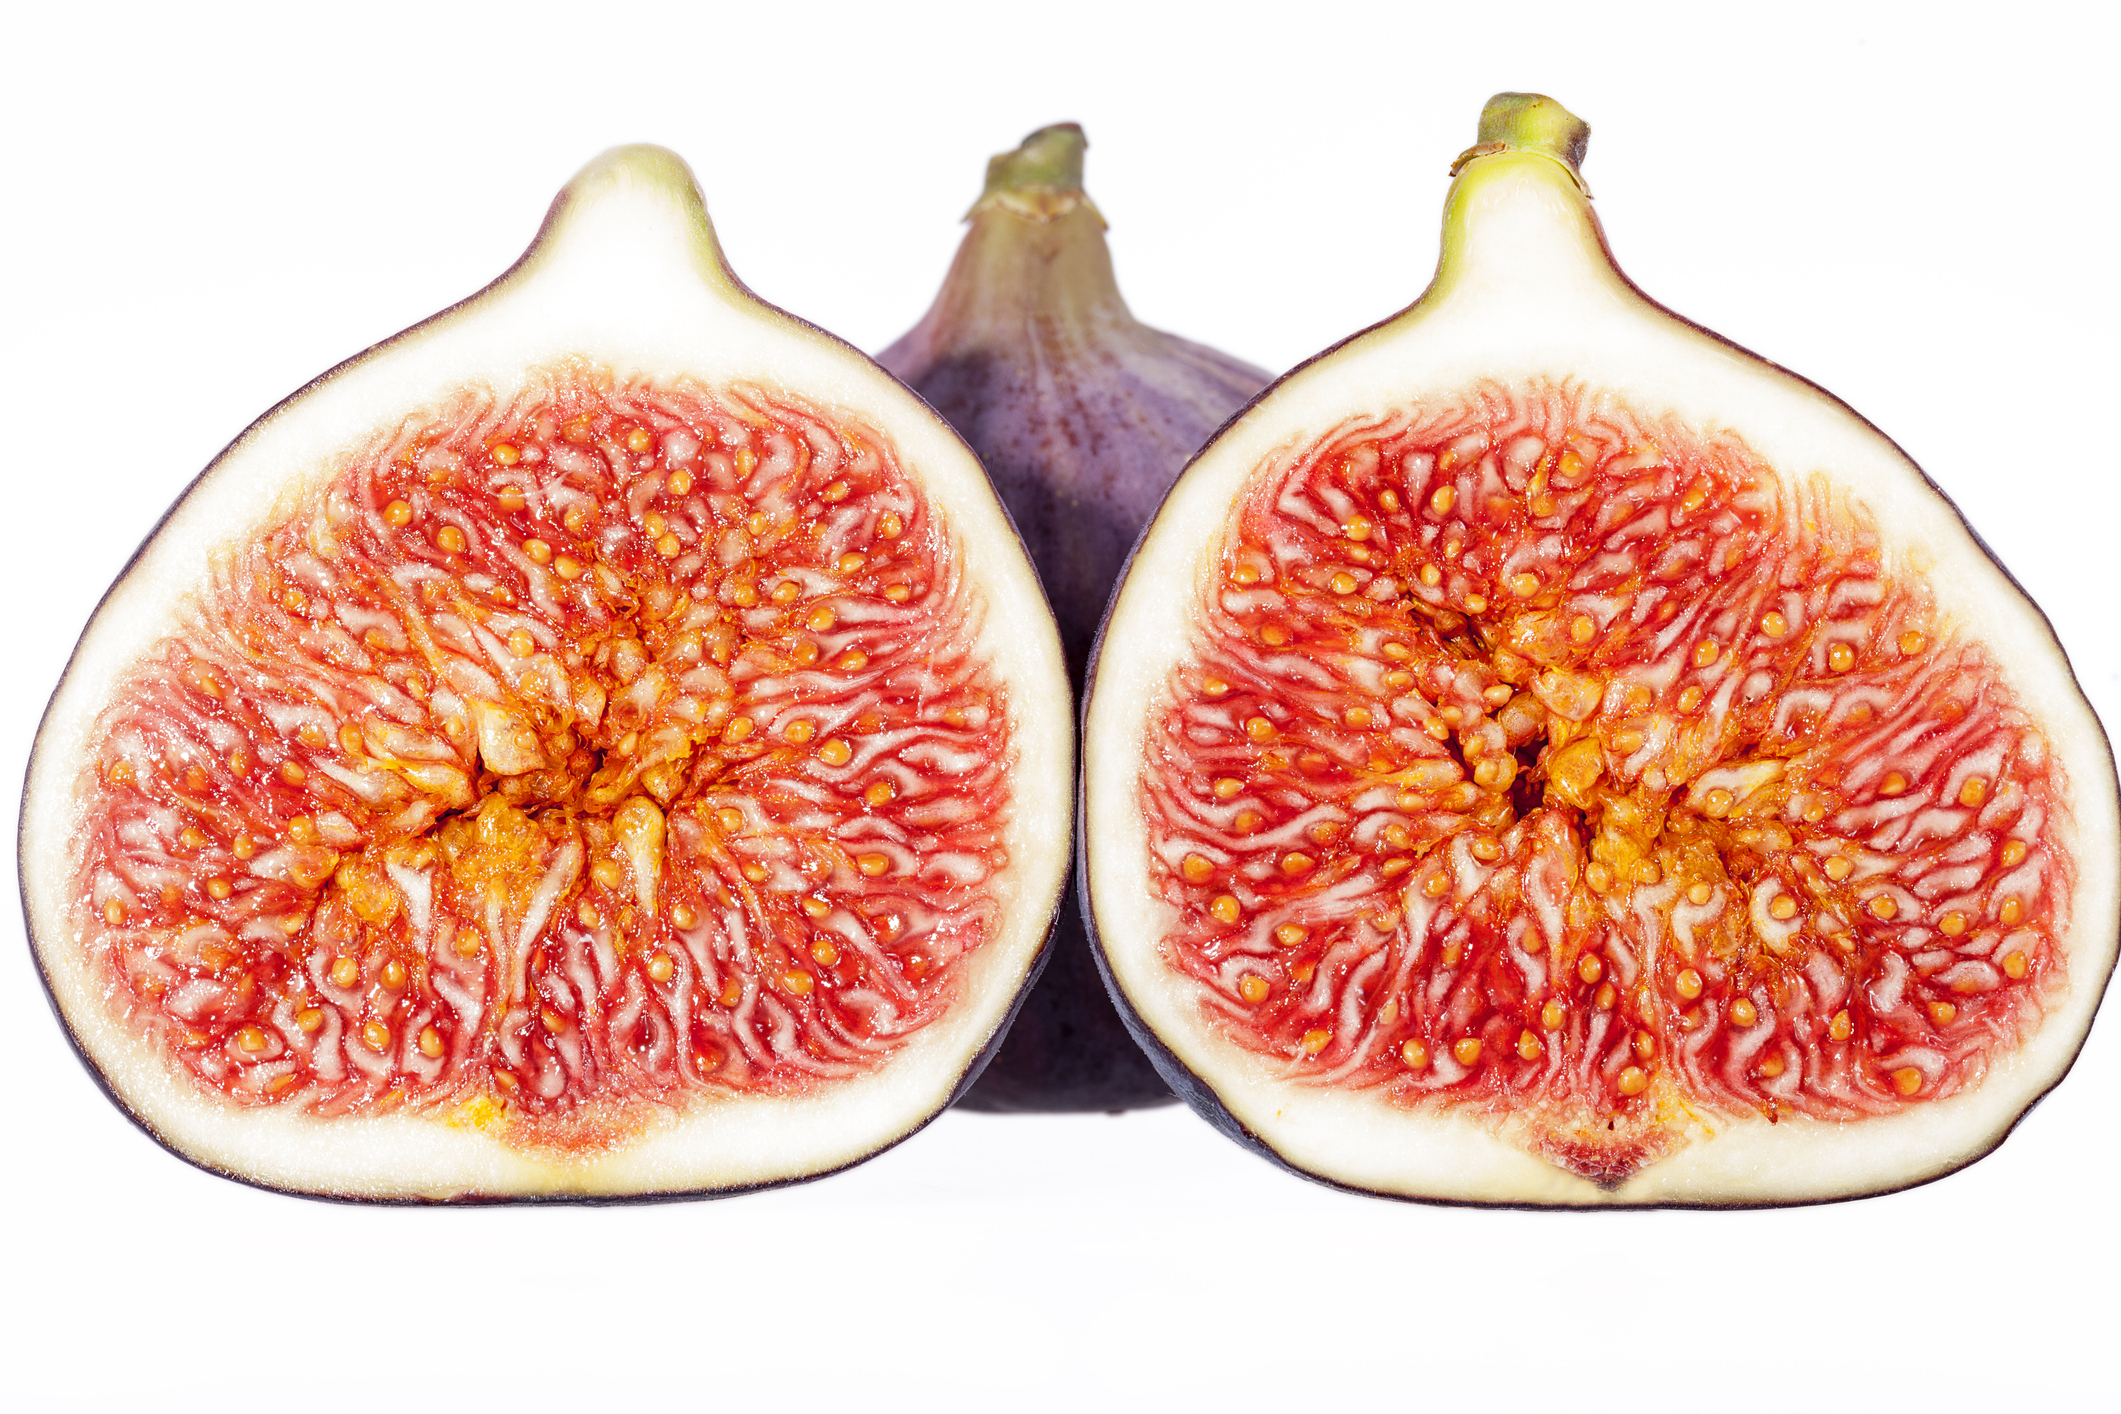 Figs are fantastic, psoralen can even treat Her-2 breast cancer